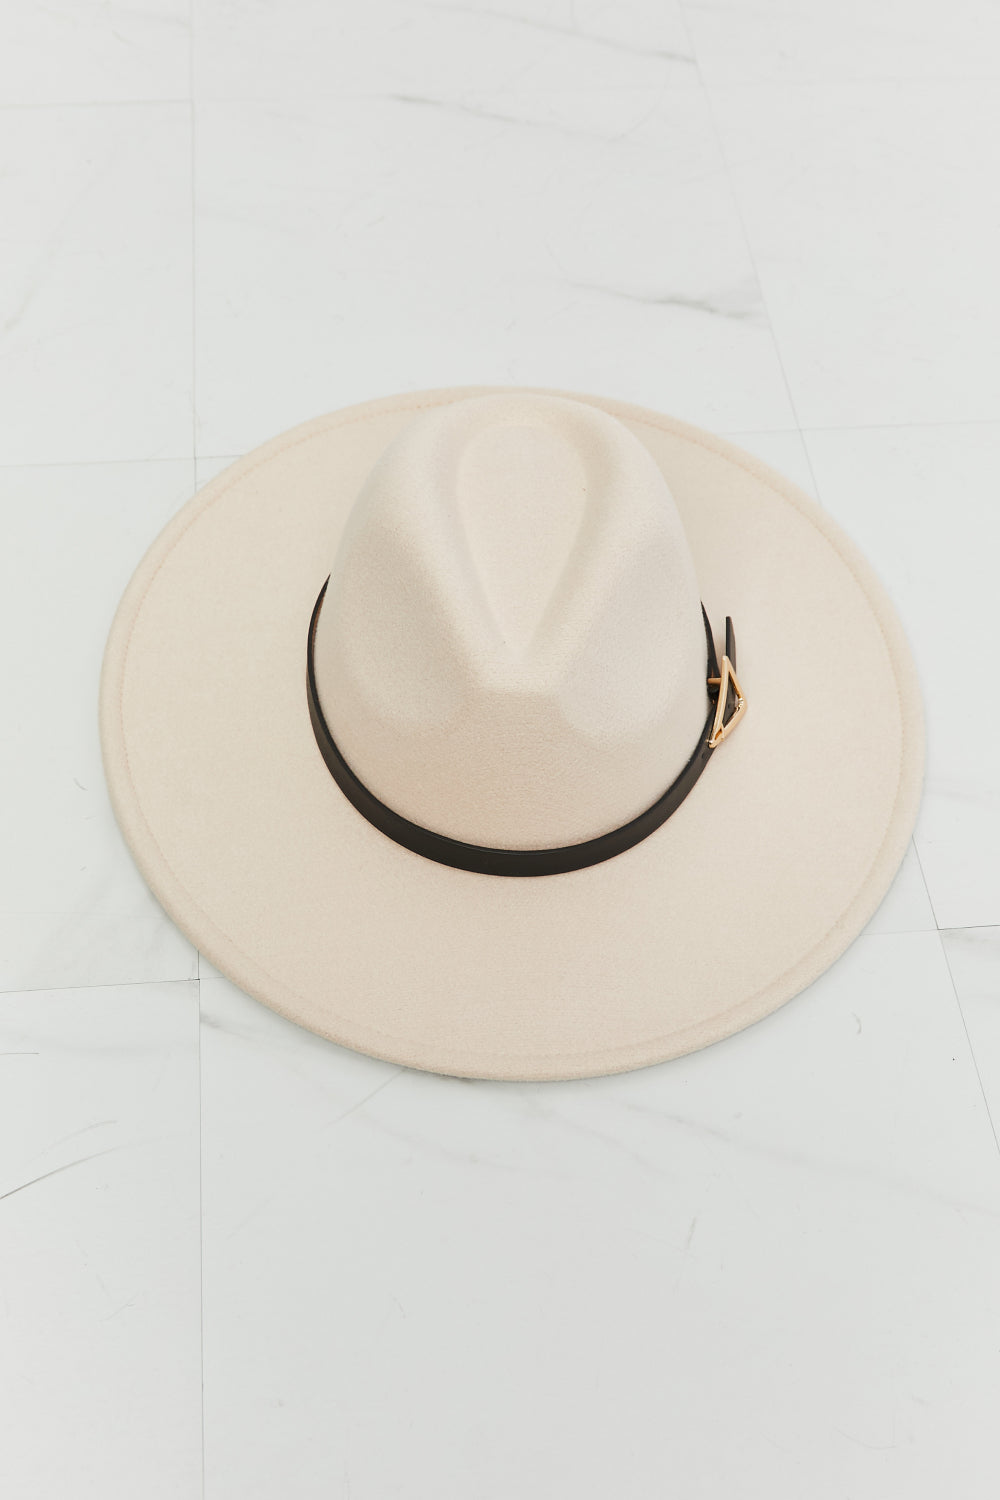 Fame Ride Along Fedora Hat Print on any thing USA/STOD clothes